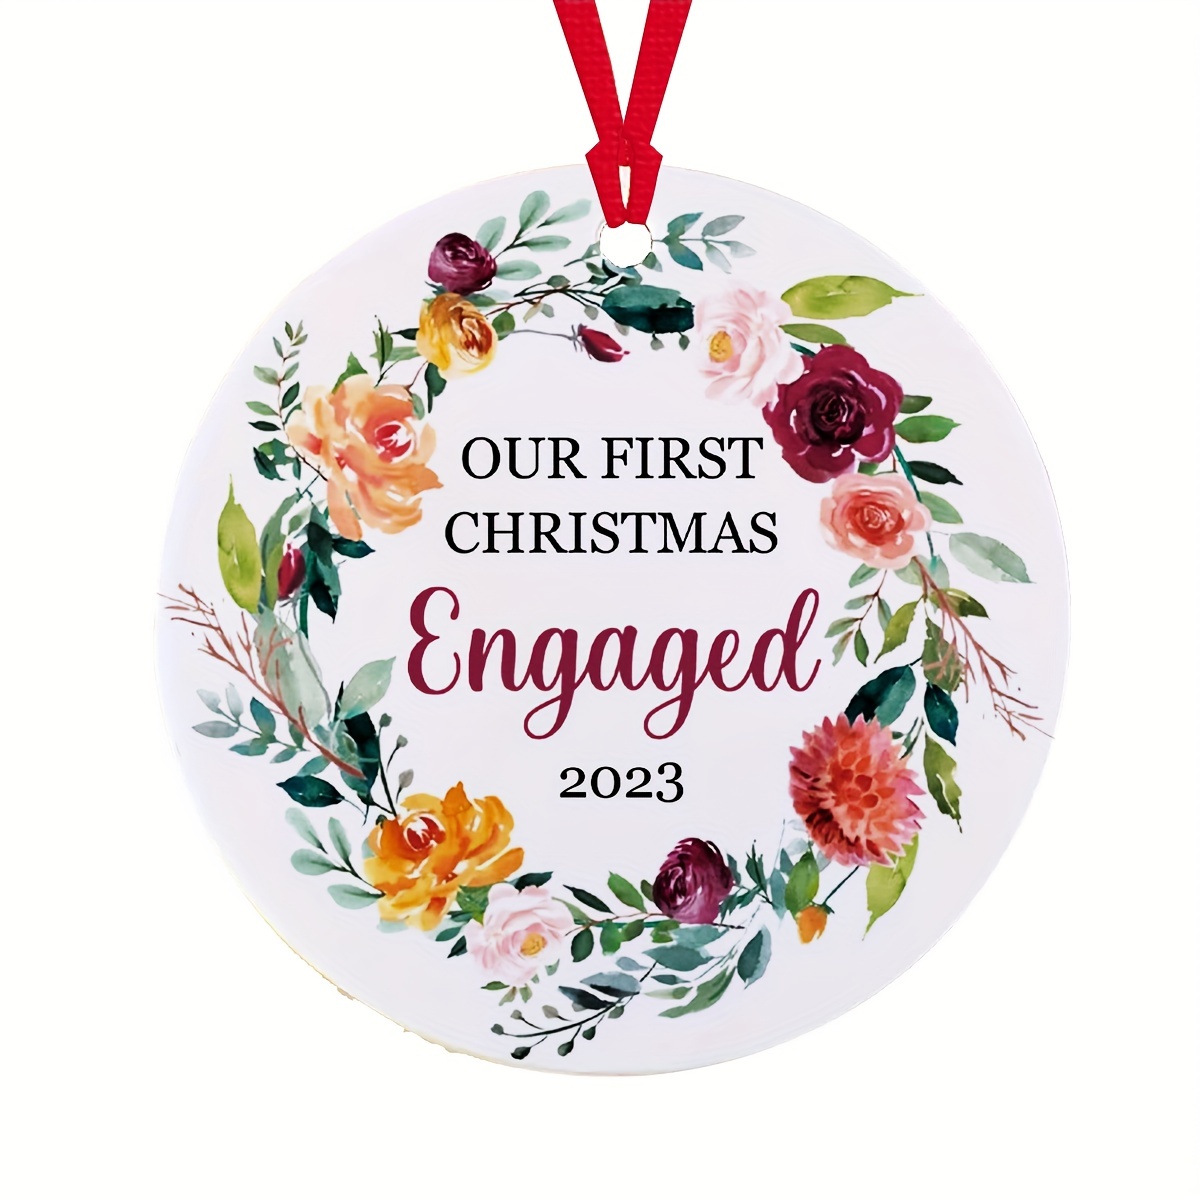 First Christmas Married Ornament 2023, Wedding Gifts for Couple